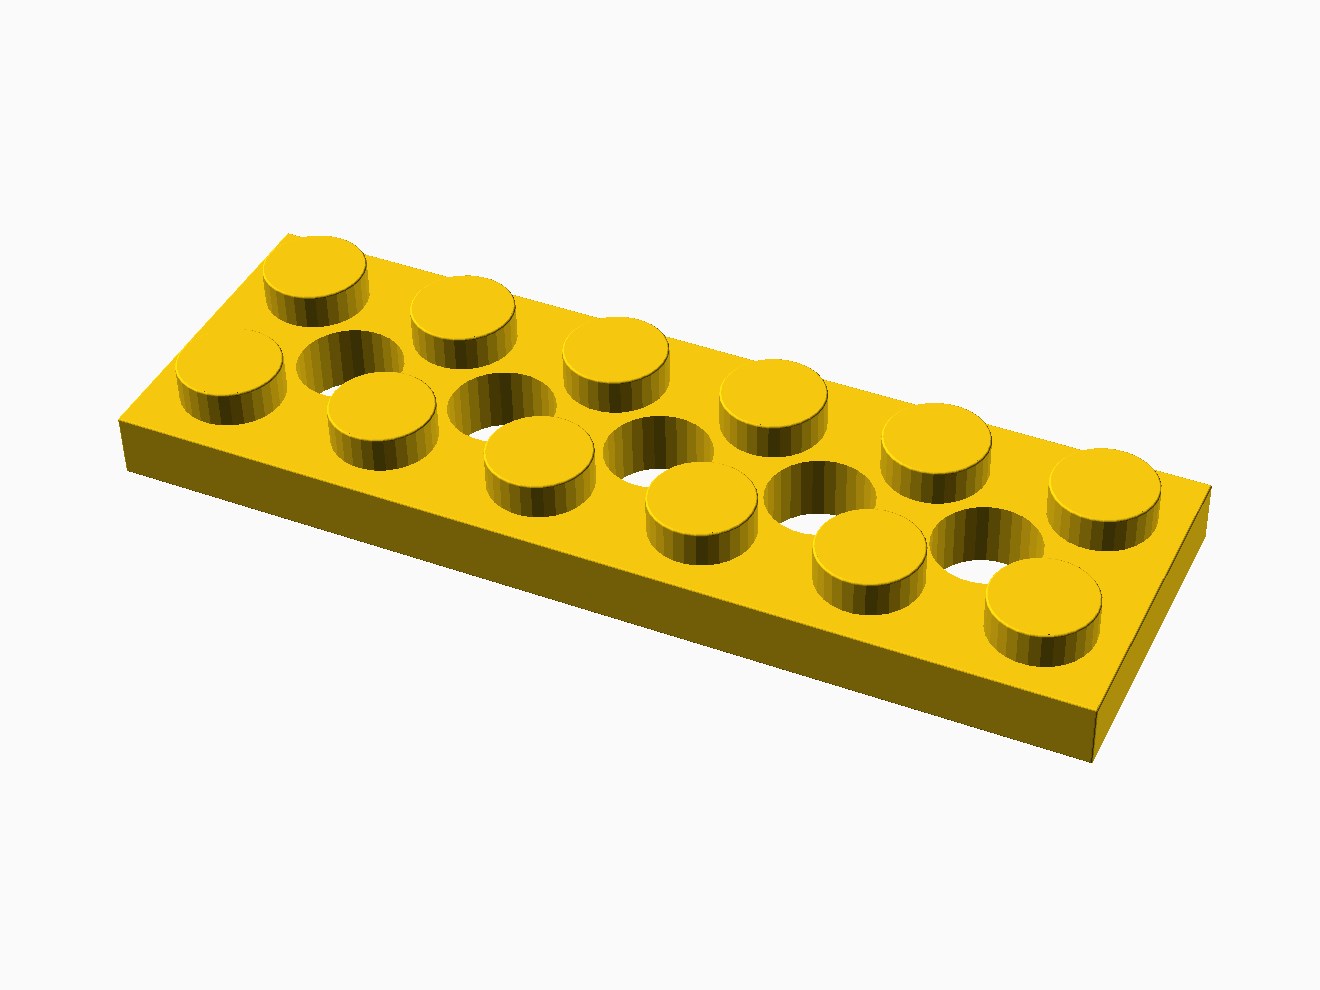 3D printable model of a LEGO Technic 6x2 Plate.